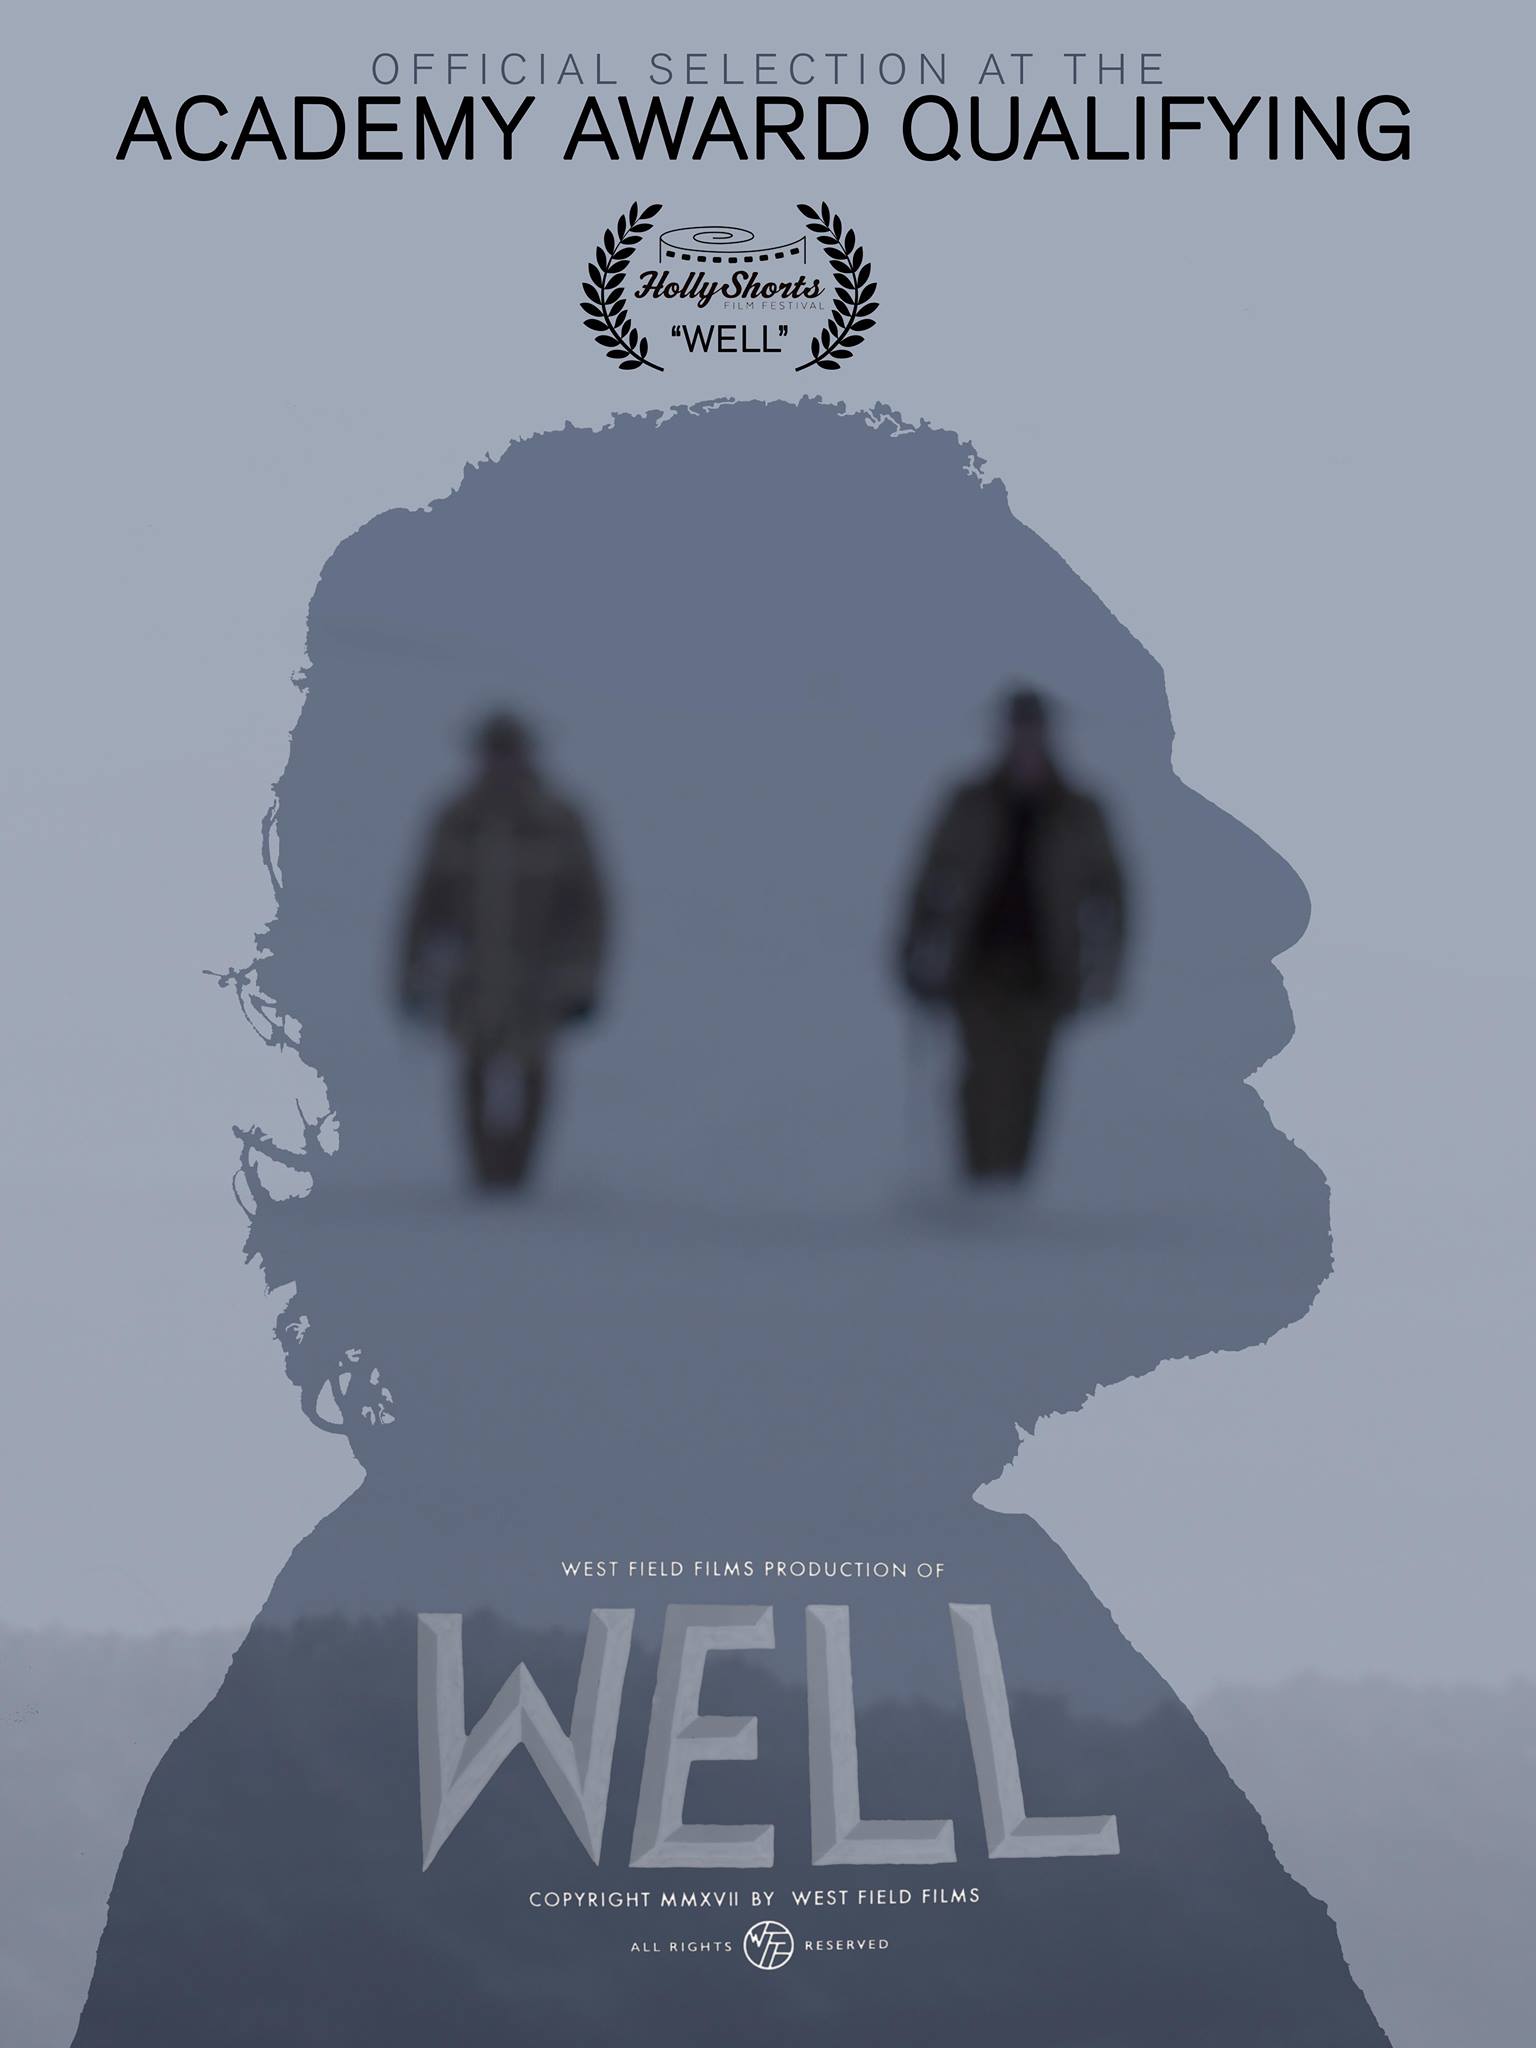 Powers’ Short “Well” on Amazon Prime